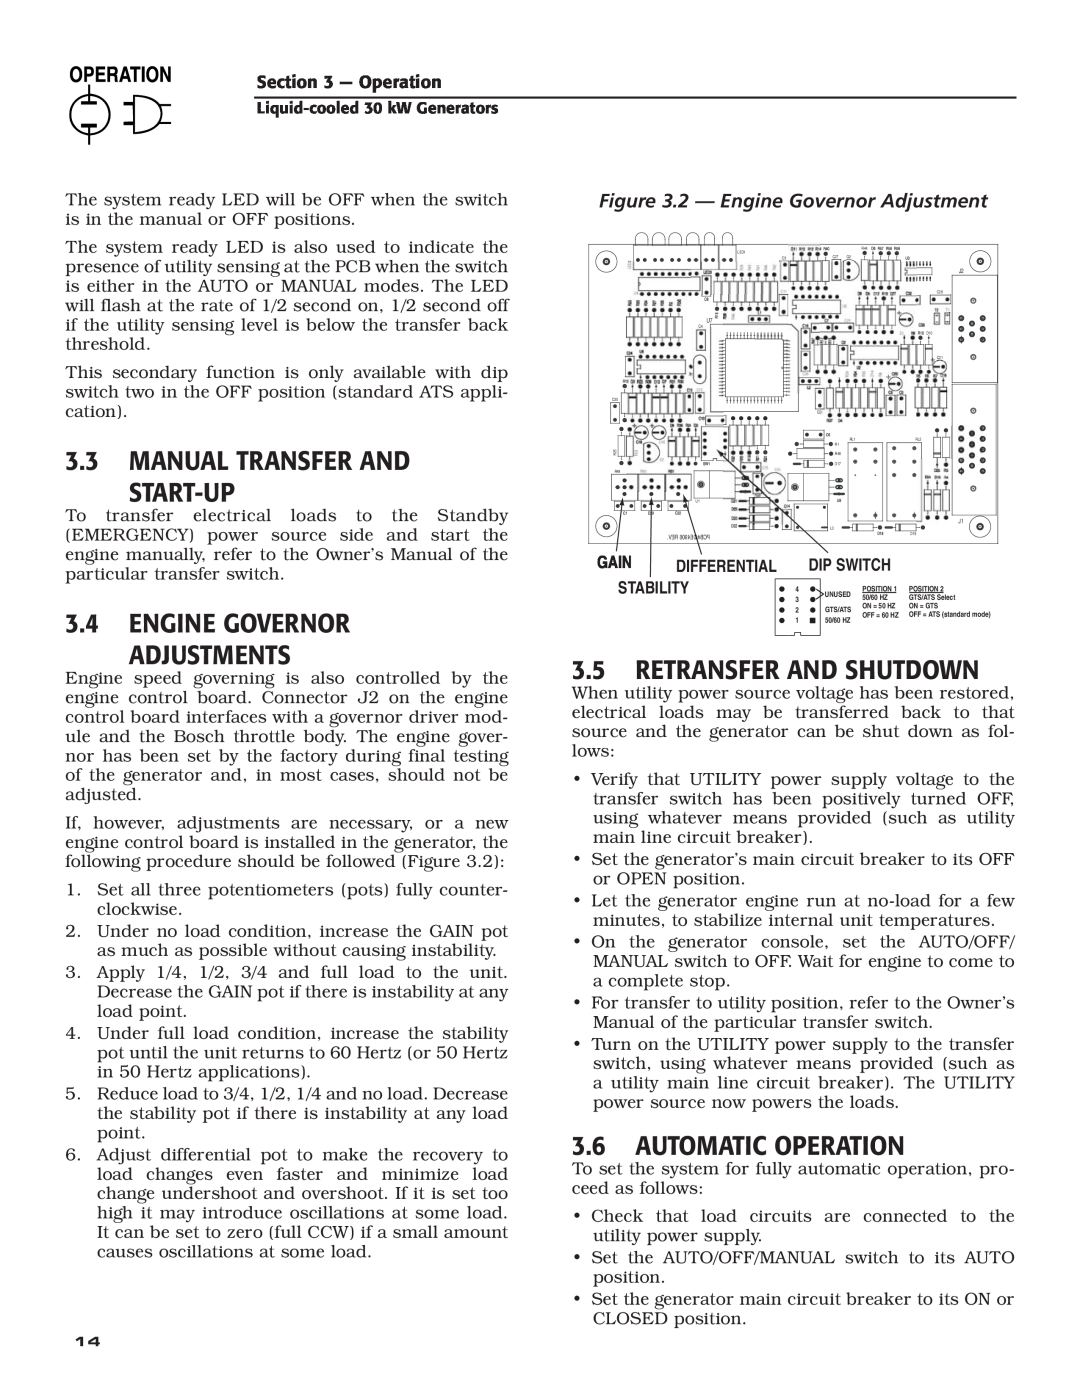 Generac Power Systems 004988-4 Manual Transfer And Start-Up, Engine Governor, Adjustments, Retransfer And Shutdown 